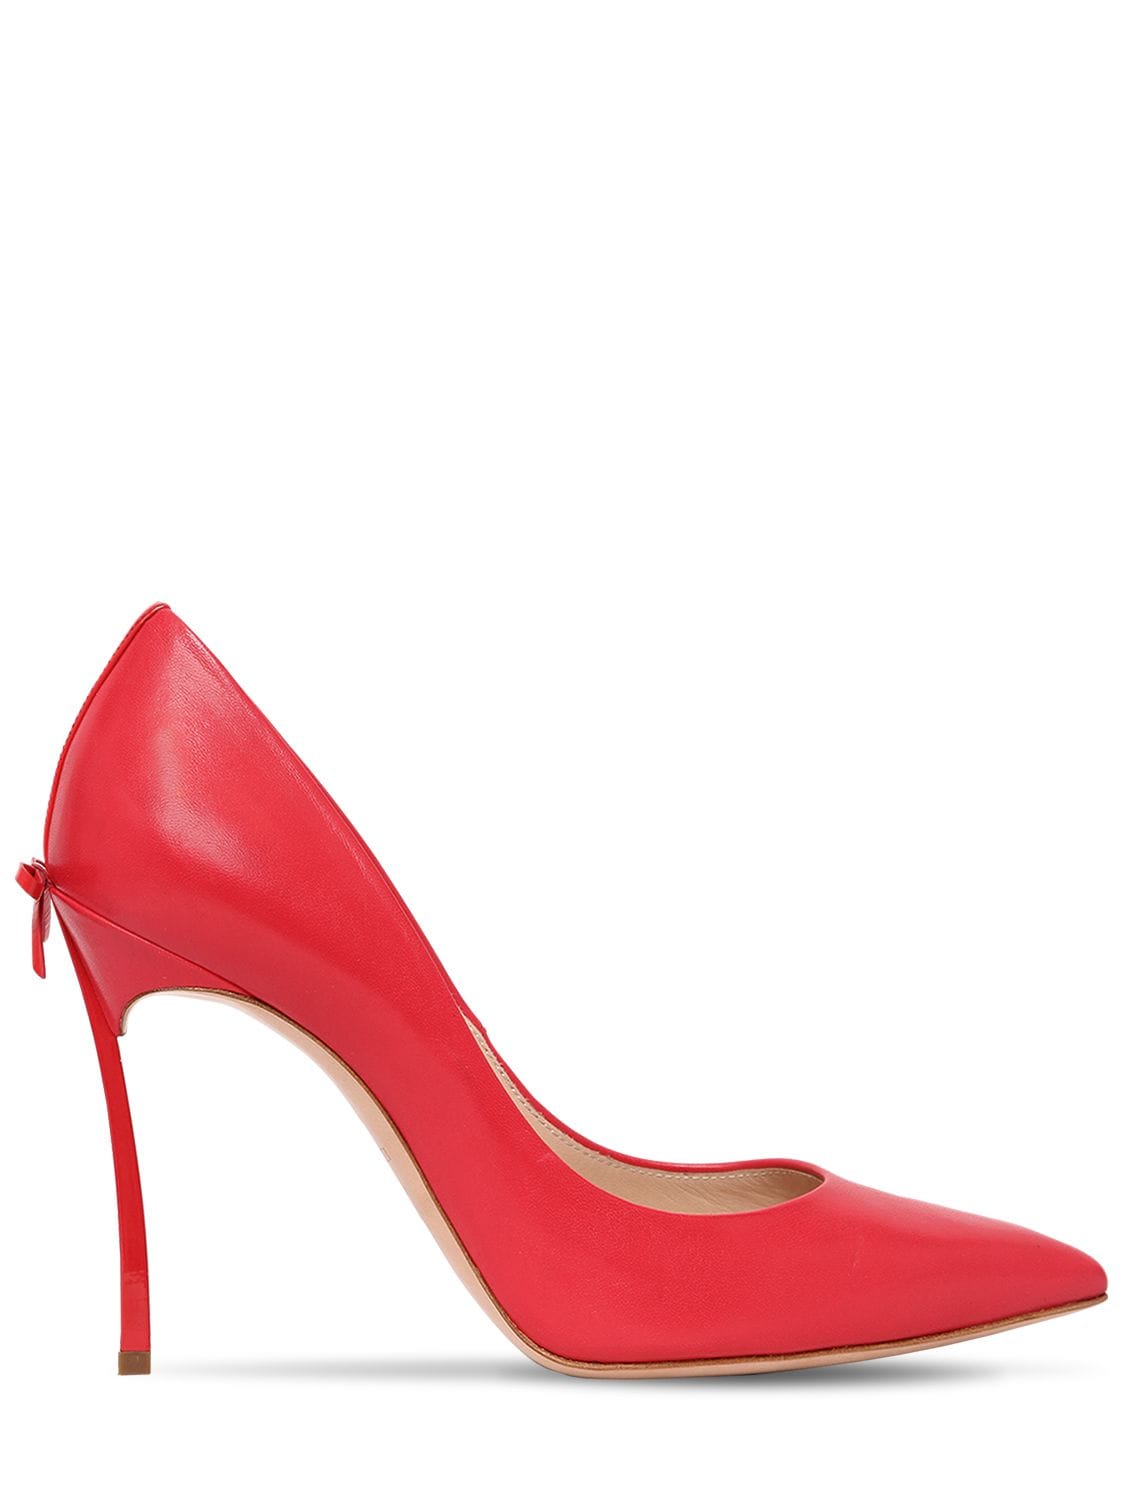 Casadei 100mm Blade Leather Pumps In Red